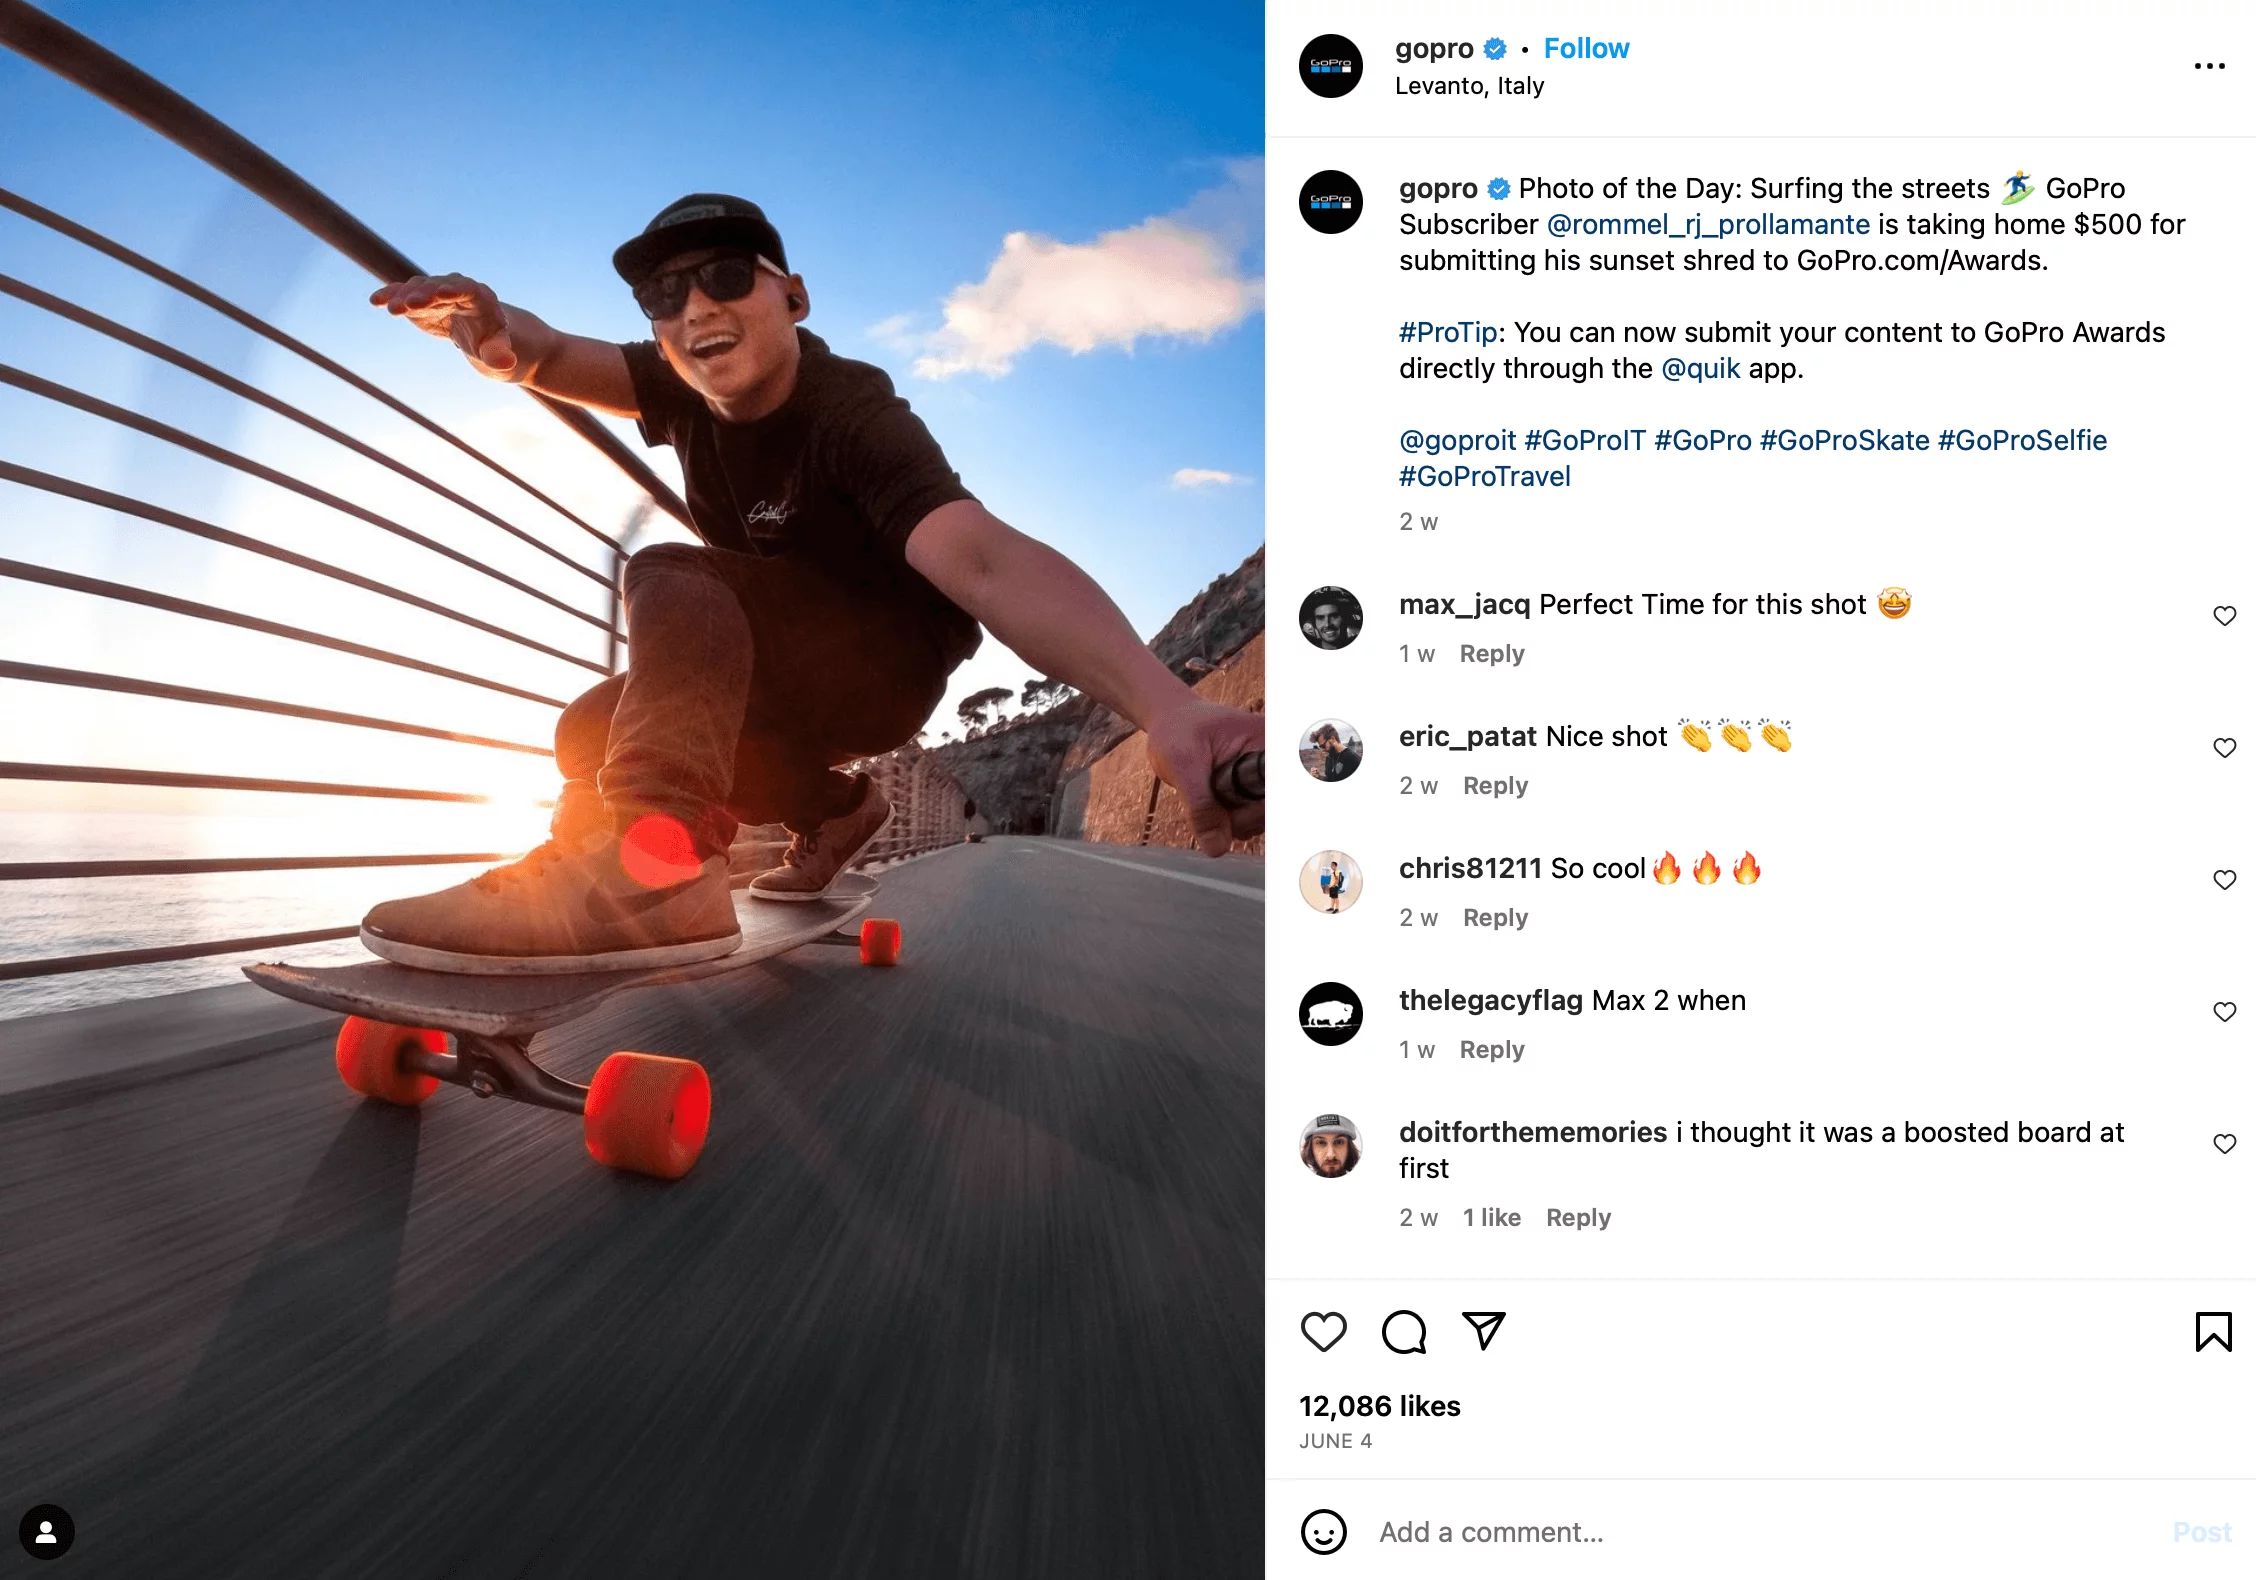 GoPro photo of the day Instagram post showing a skateboard surfer on a street with a blue sky background